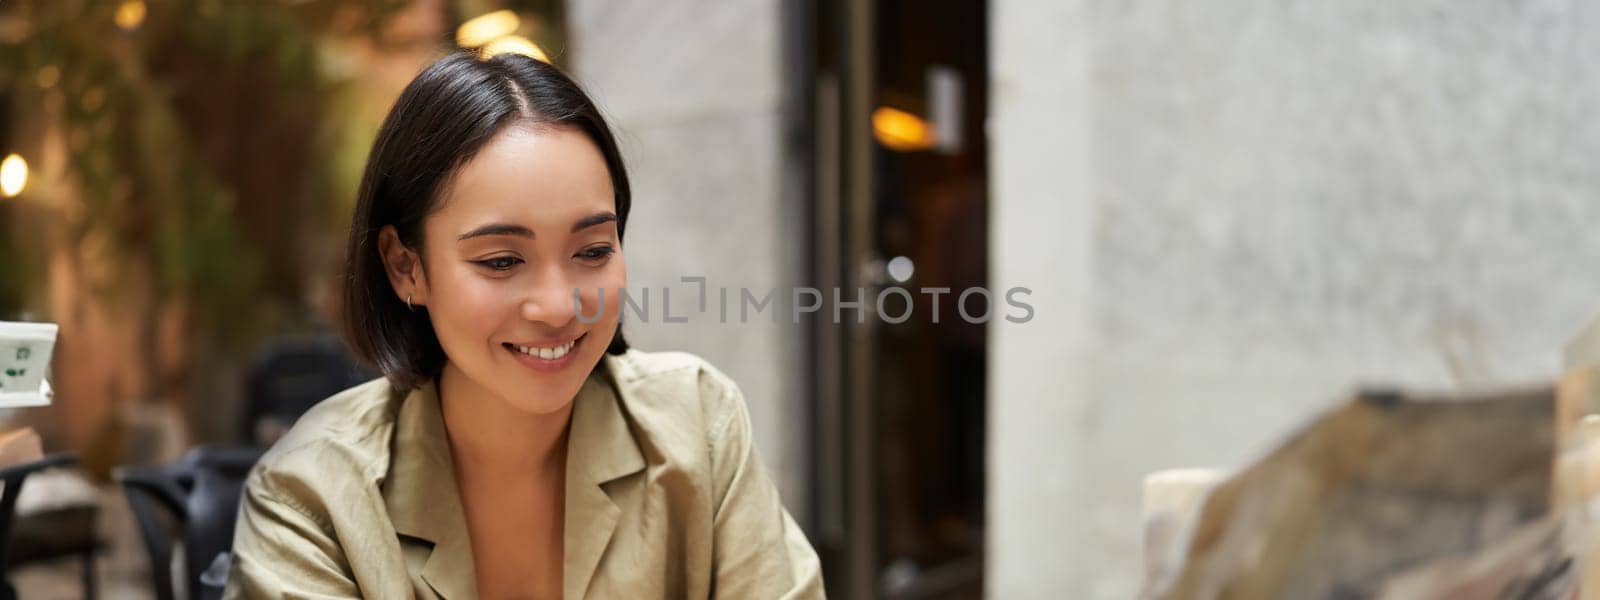 Vertical shot of young asian woman working on remote from outdoor cafe, sitting with laptop and smiling, studying by Benzoix